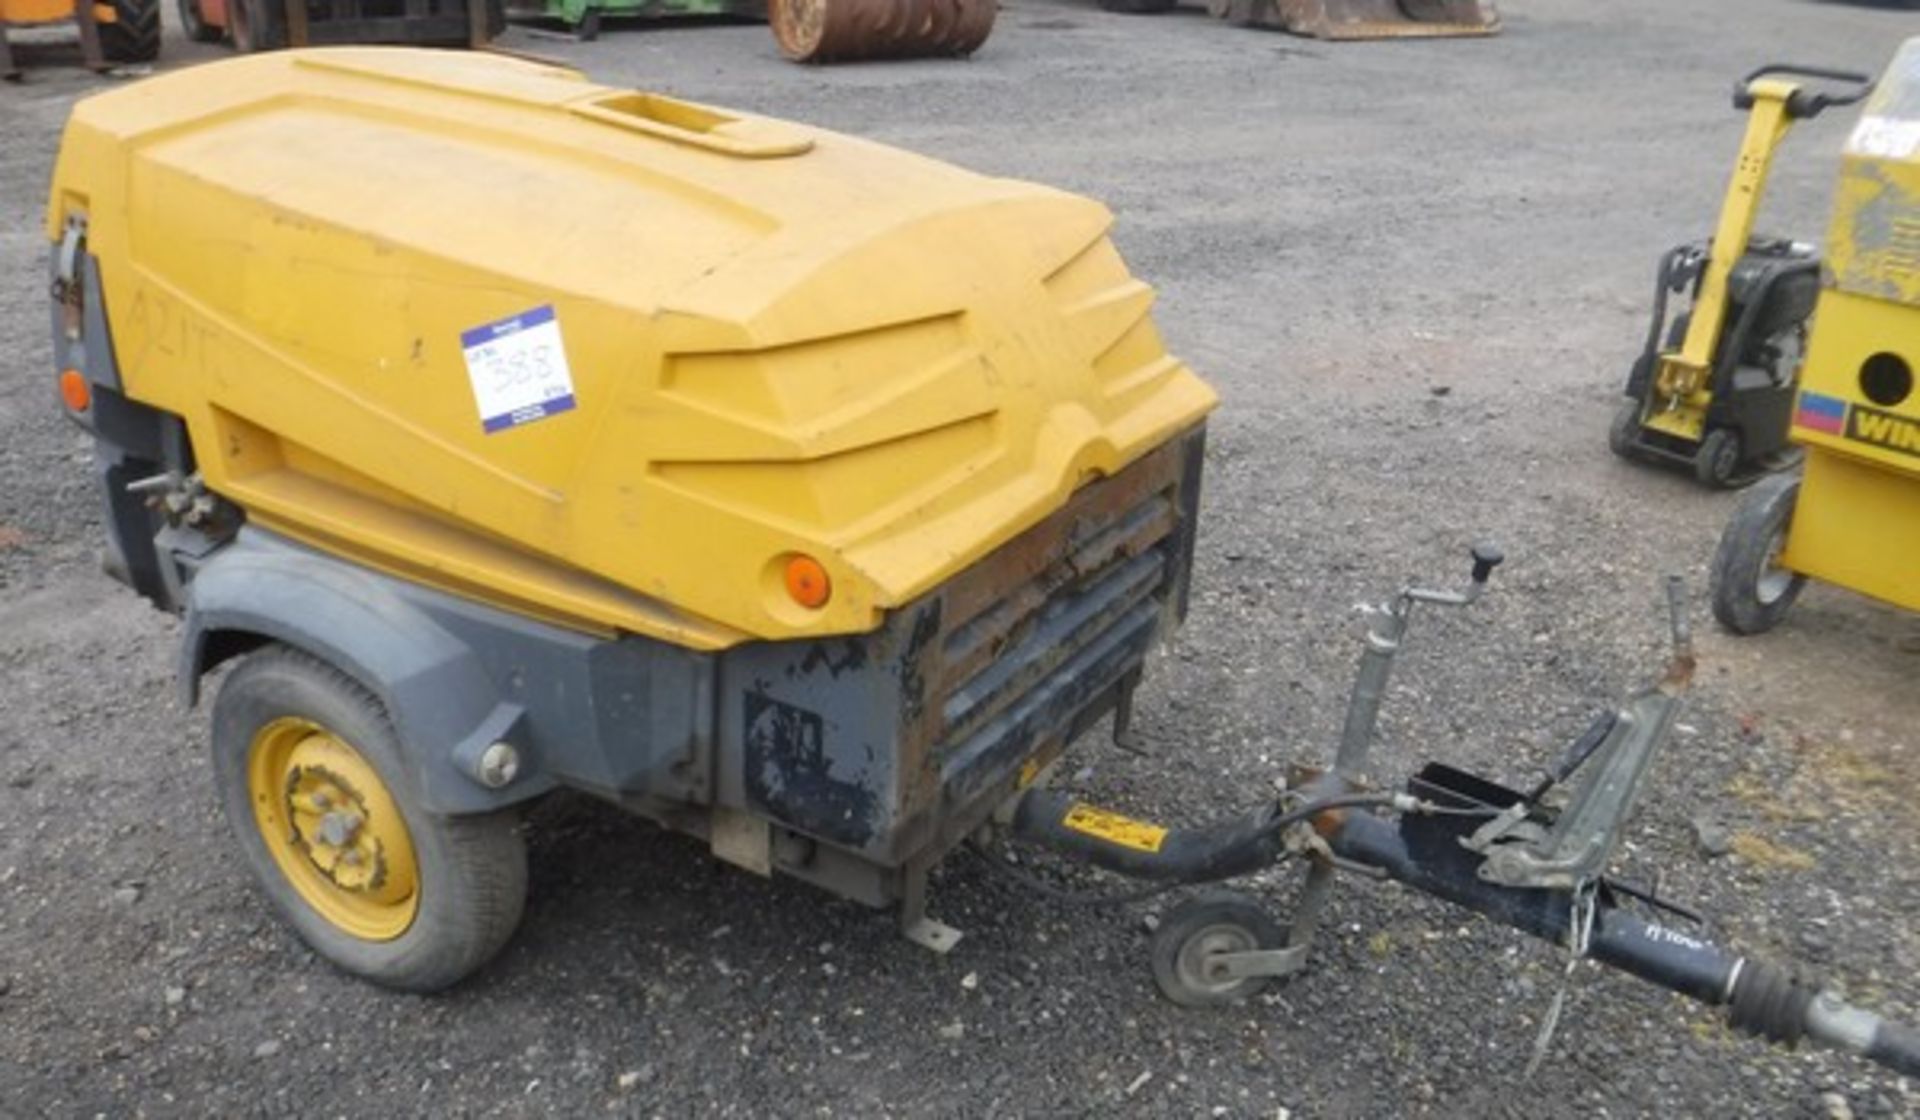 ATLAS COPCO XS37 single tool compressor 1911hrs (not verified). Needs electrics repaired.